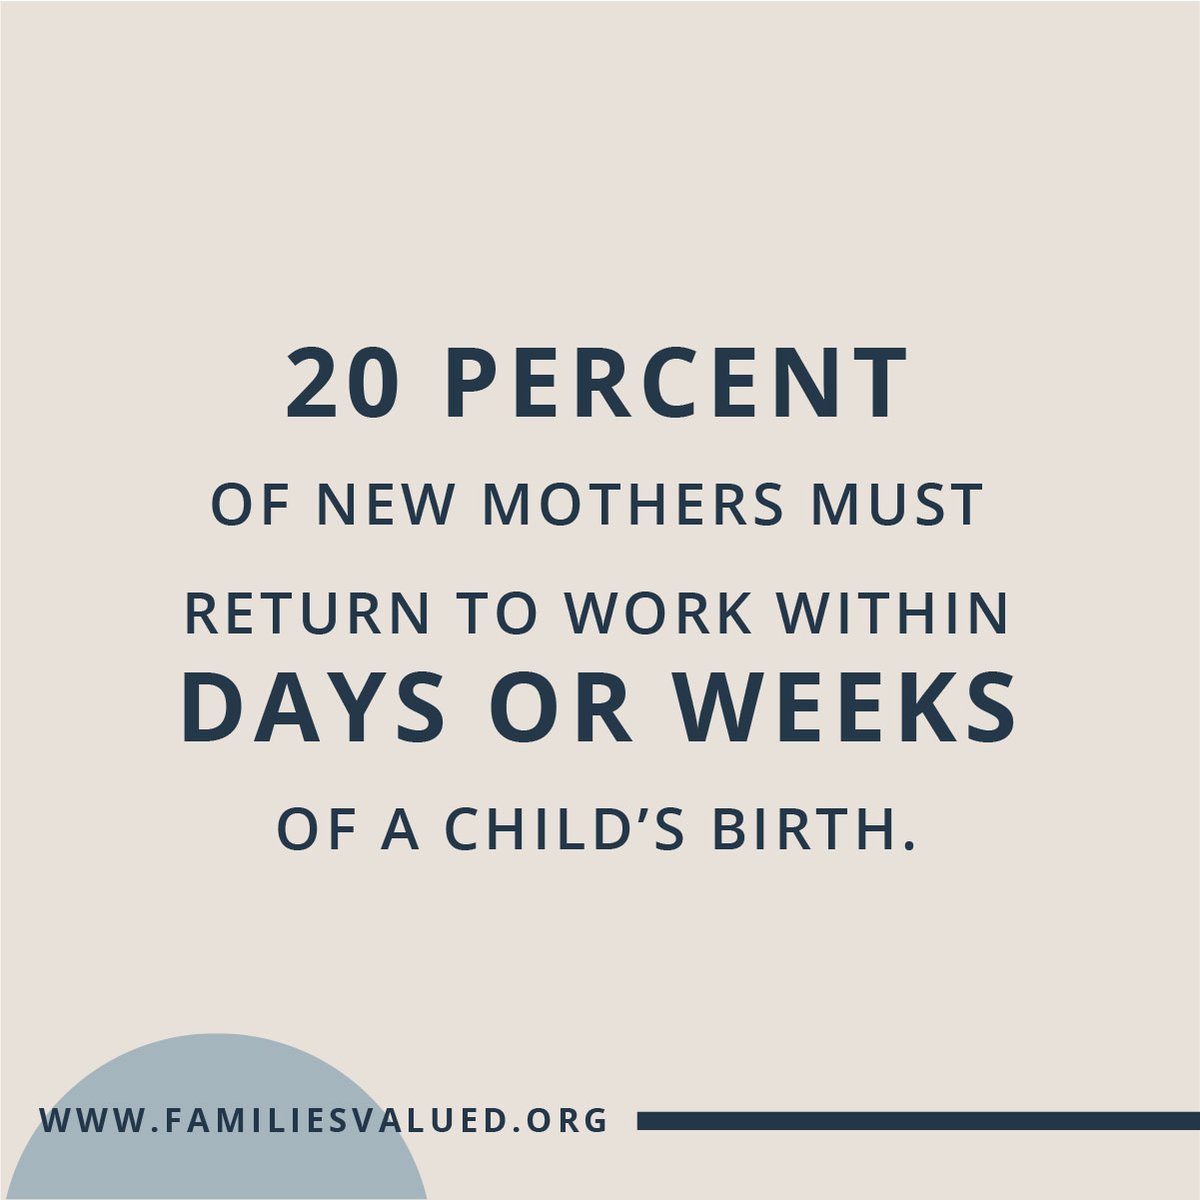 But the nature of our economy and the absence of a national paid leave program limits parents' time for in person caregiving.